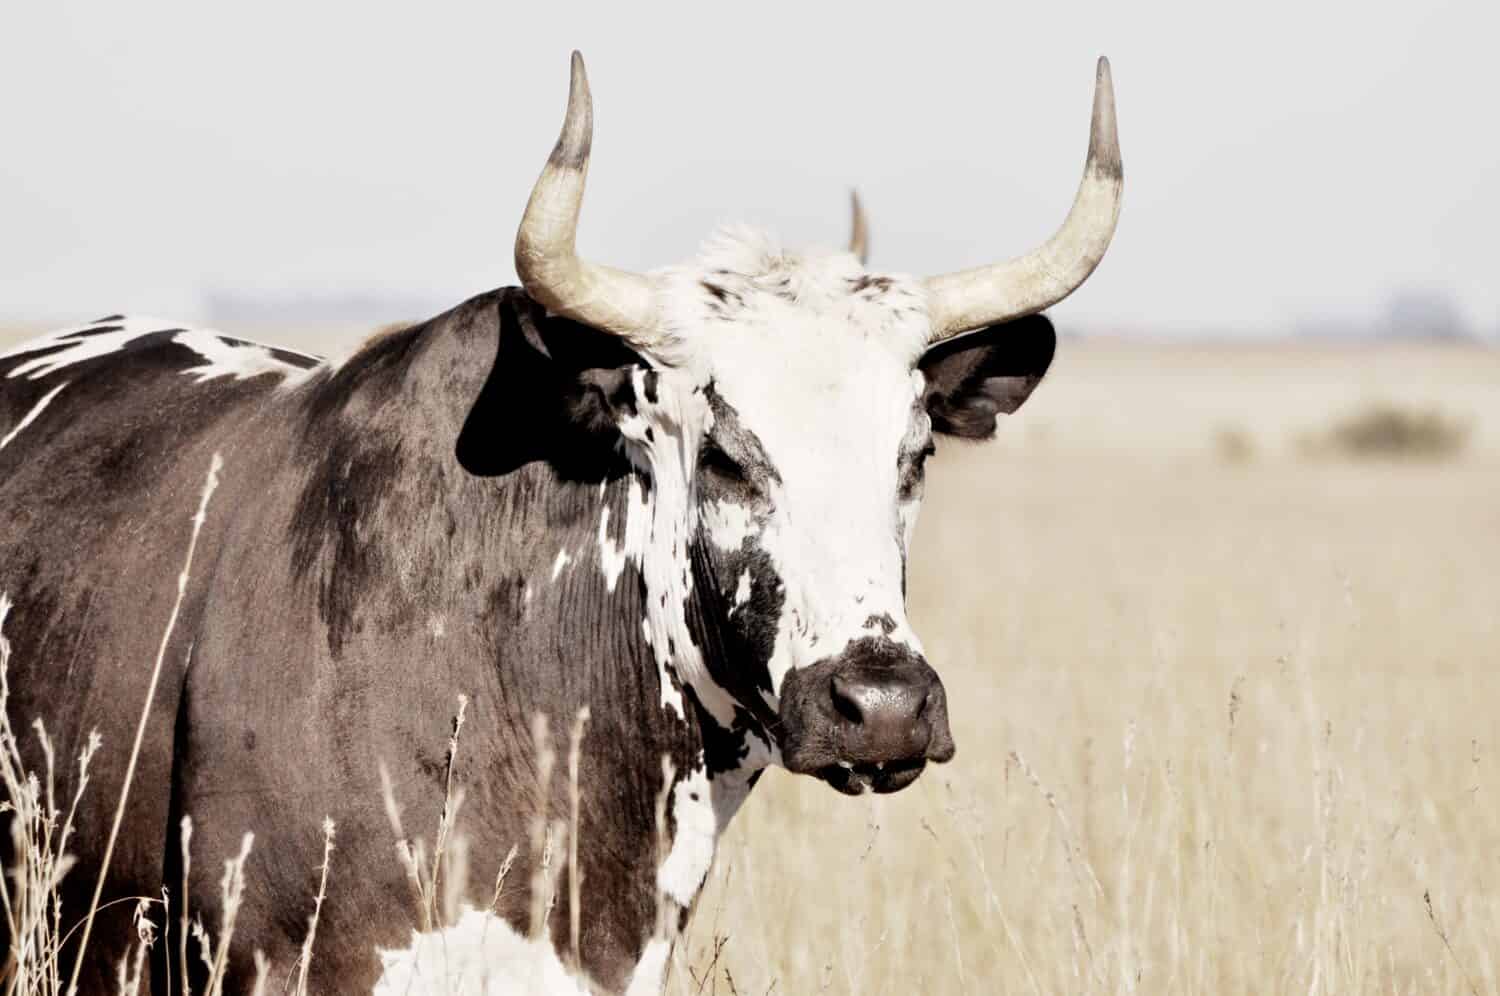 A portrait of a Texas Longhorn cattle with black and white patterned skin in the farmland